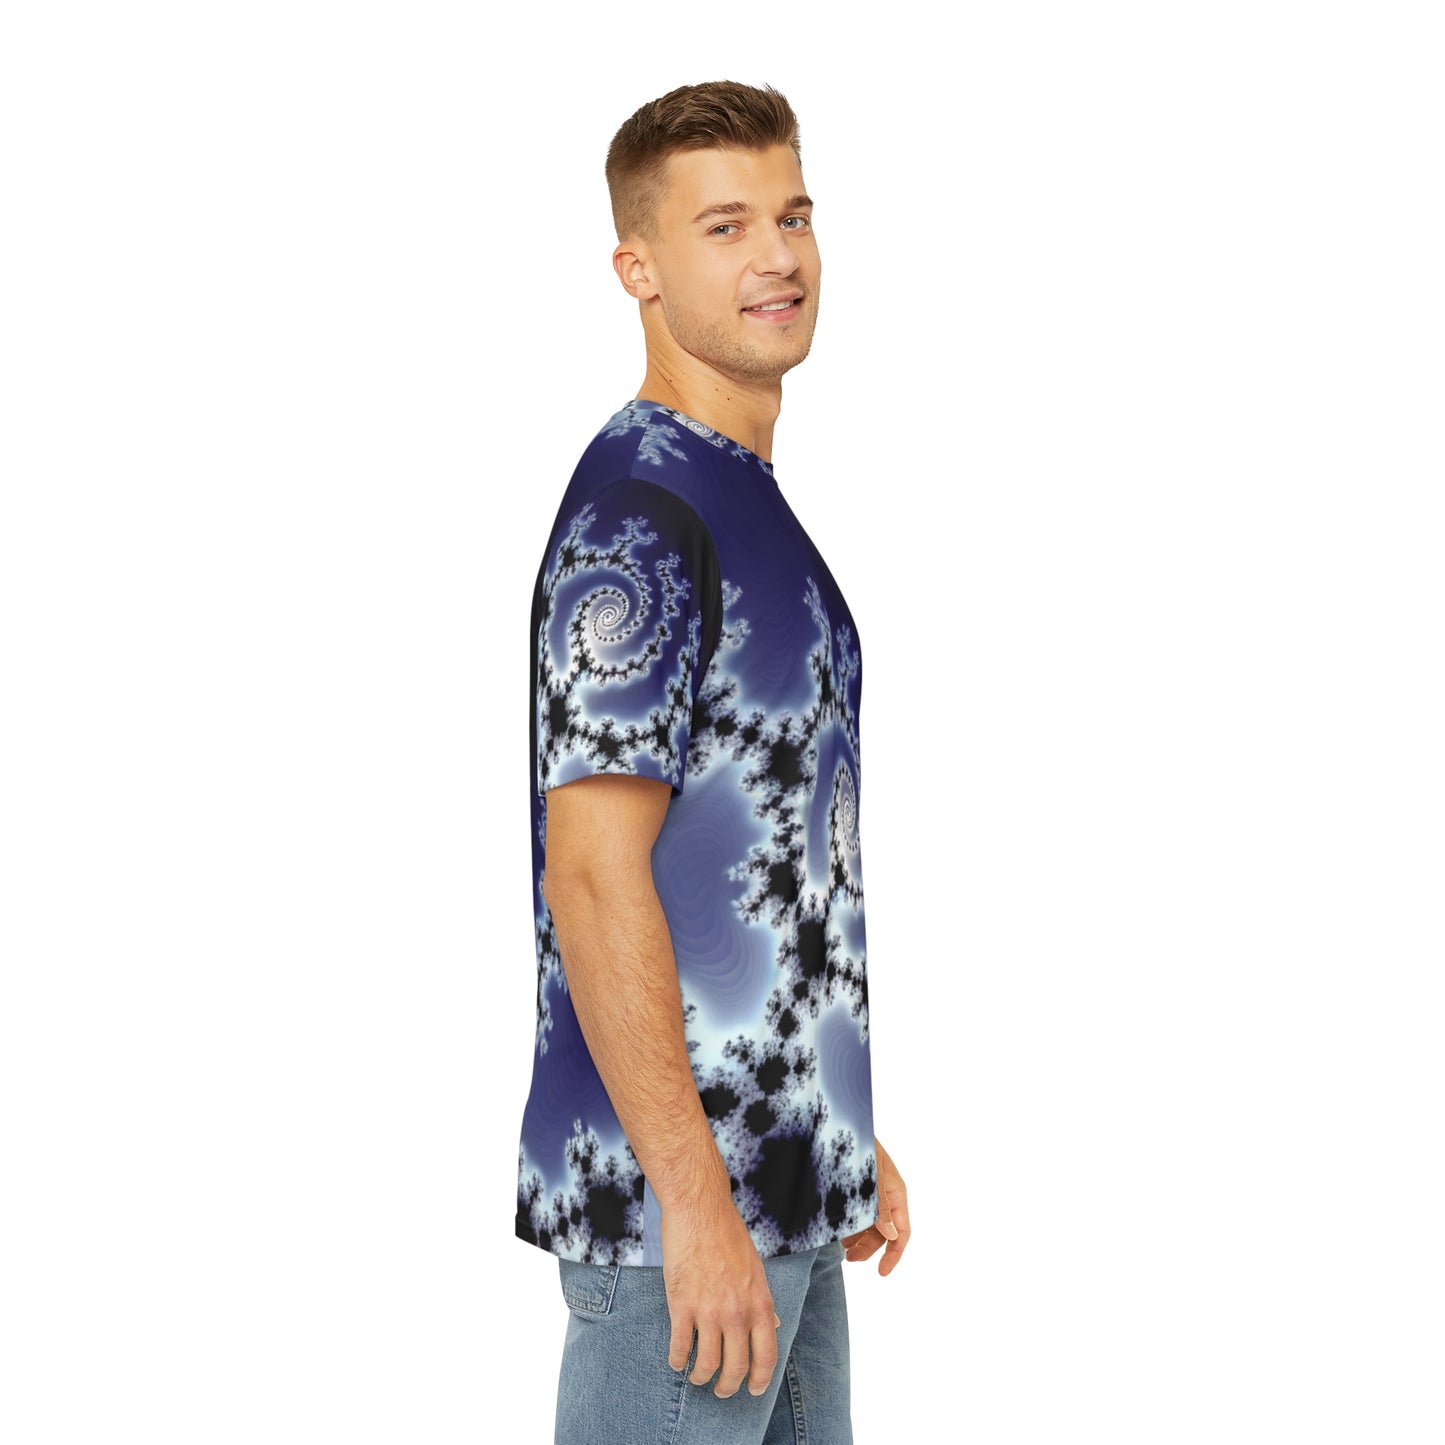 Side view of the Celestial Fractal Elegance Crewneck Pullover All-Over Print Short-Sleeved Shirt purple black white fractal pattern paired with casual denim pants worn by a white man